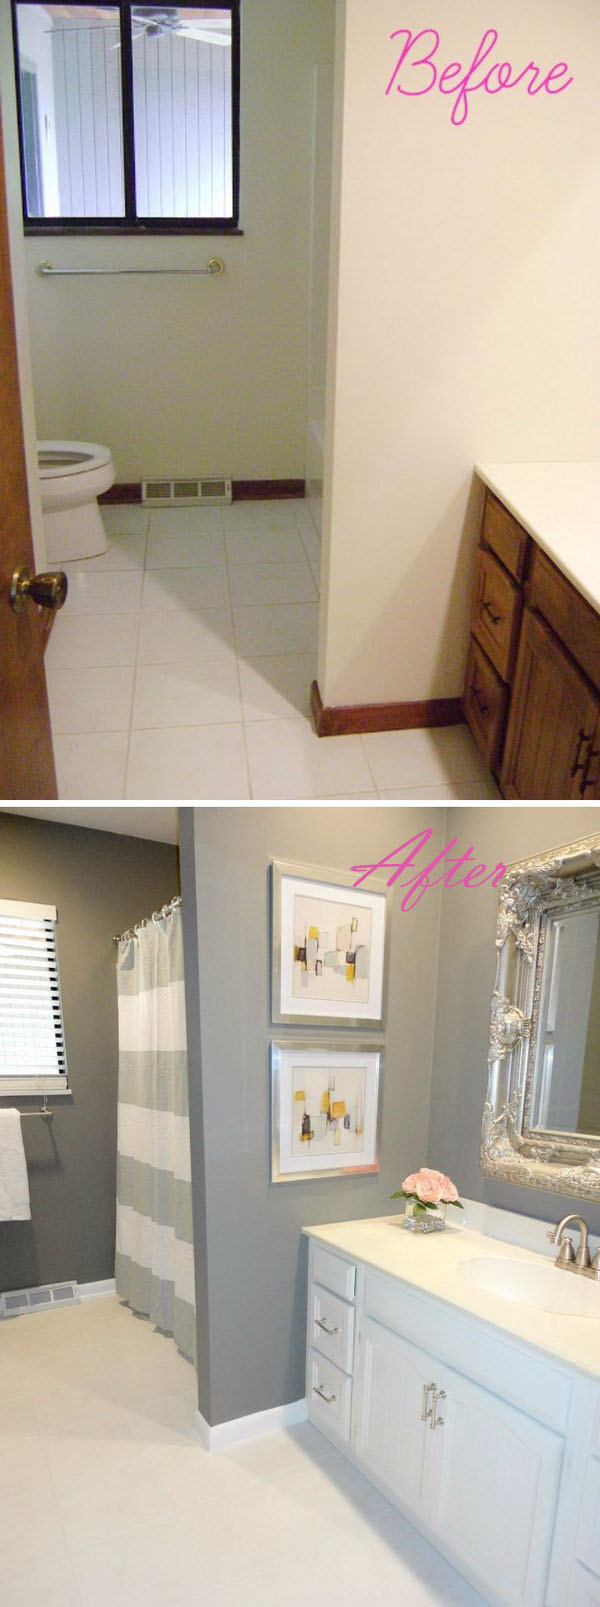 47-48-bathroom-remodel-before-and-after